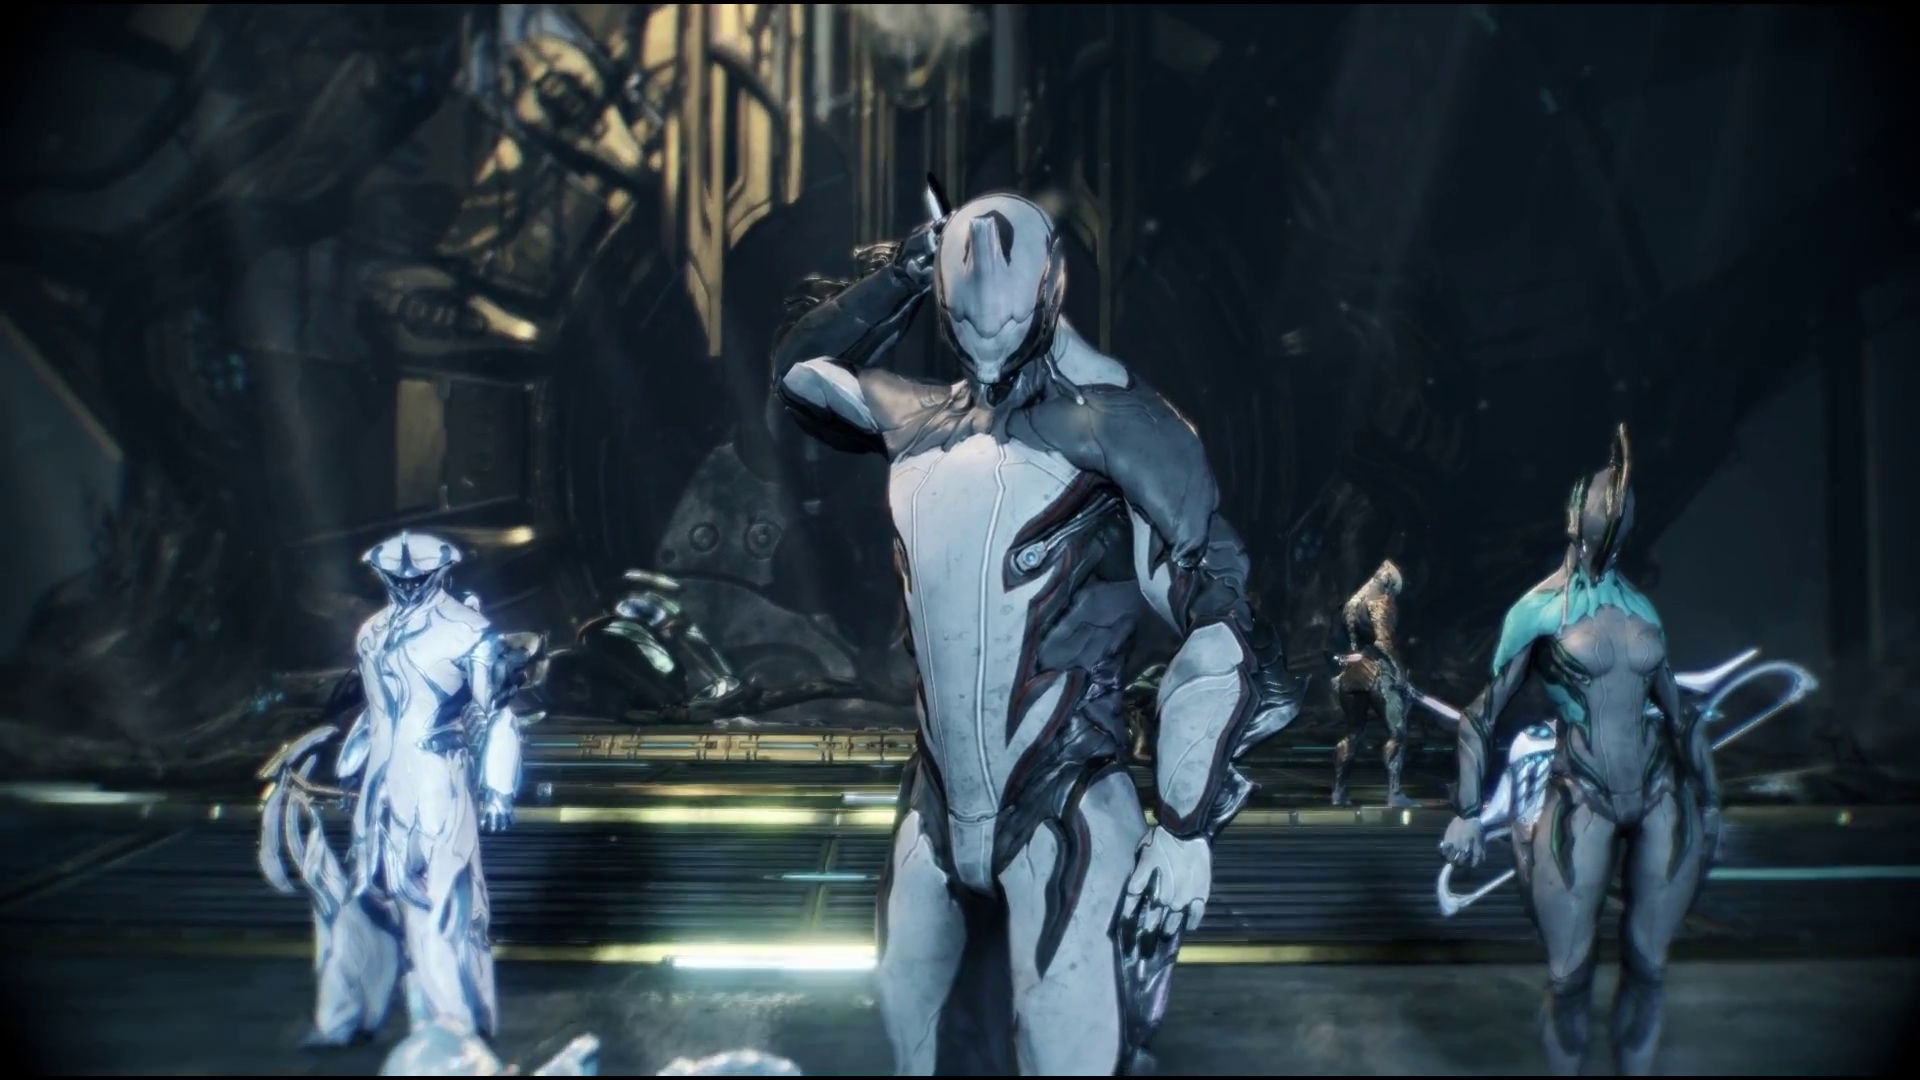 Warframe exo-armor uses unique combative technology to create the ultimate weaponry. The Warframes hold many mysterious powers and mastering one requires ...